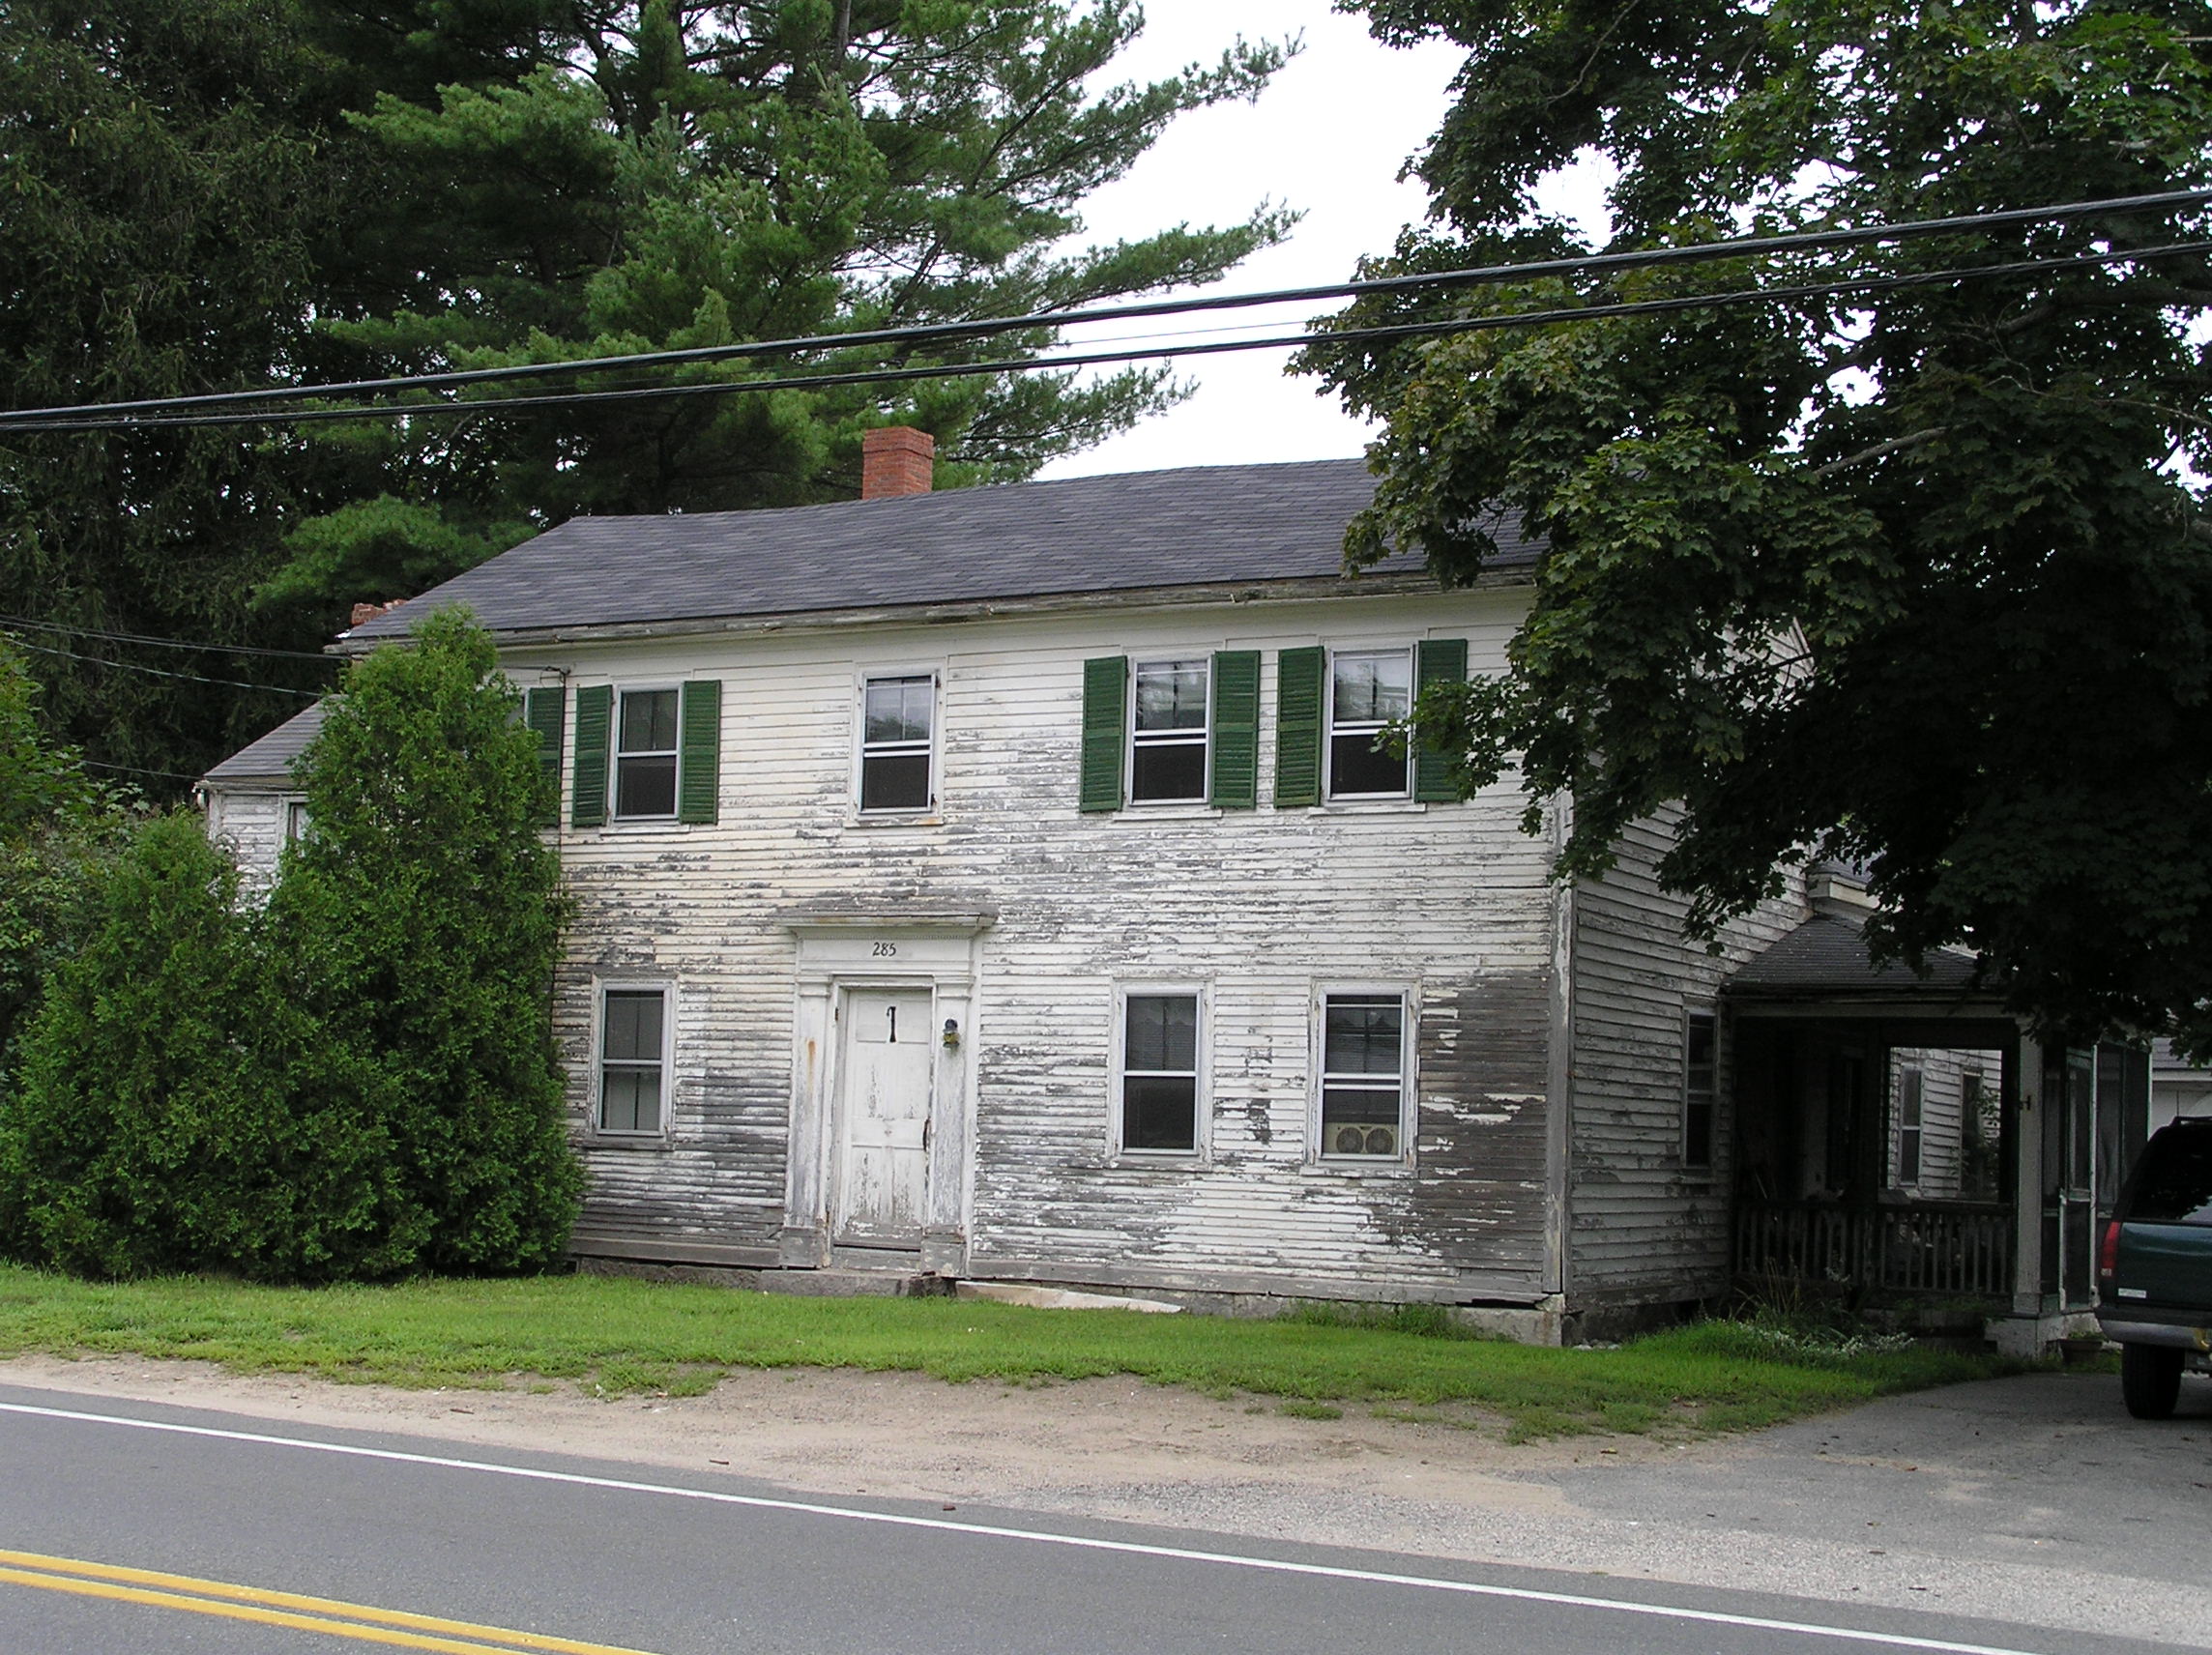 Daniel Norse house at 285 High St. in Ipswich